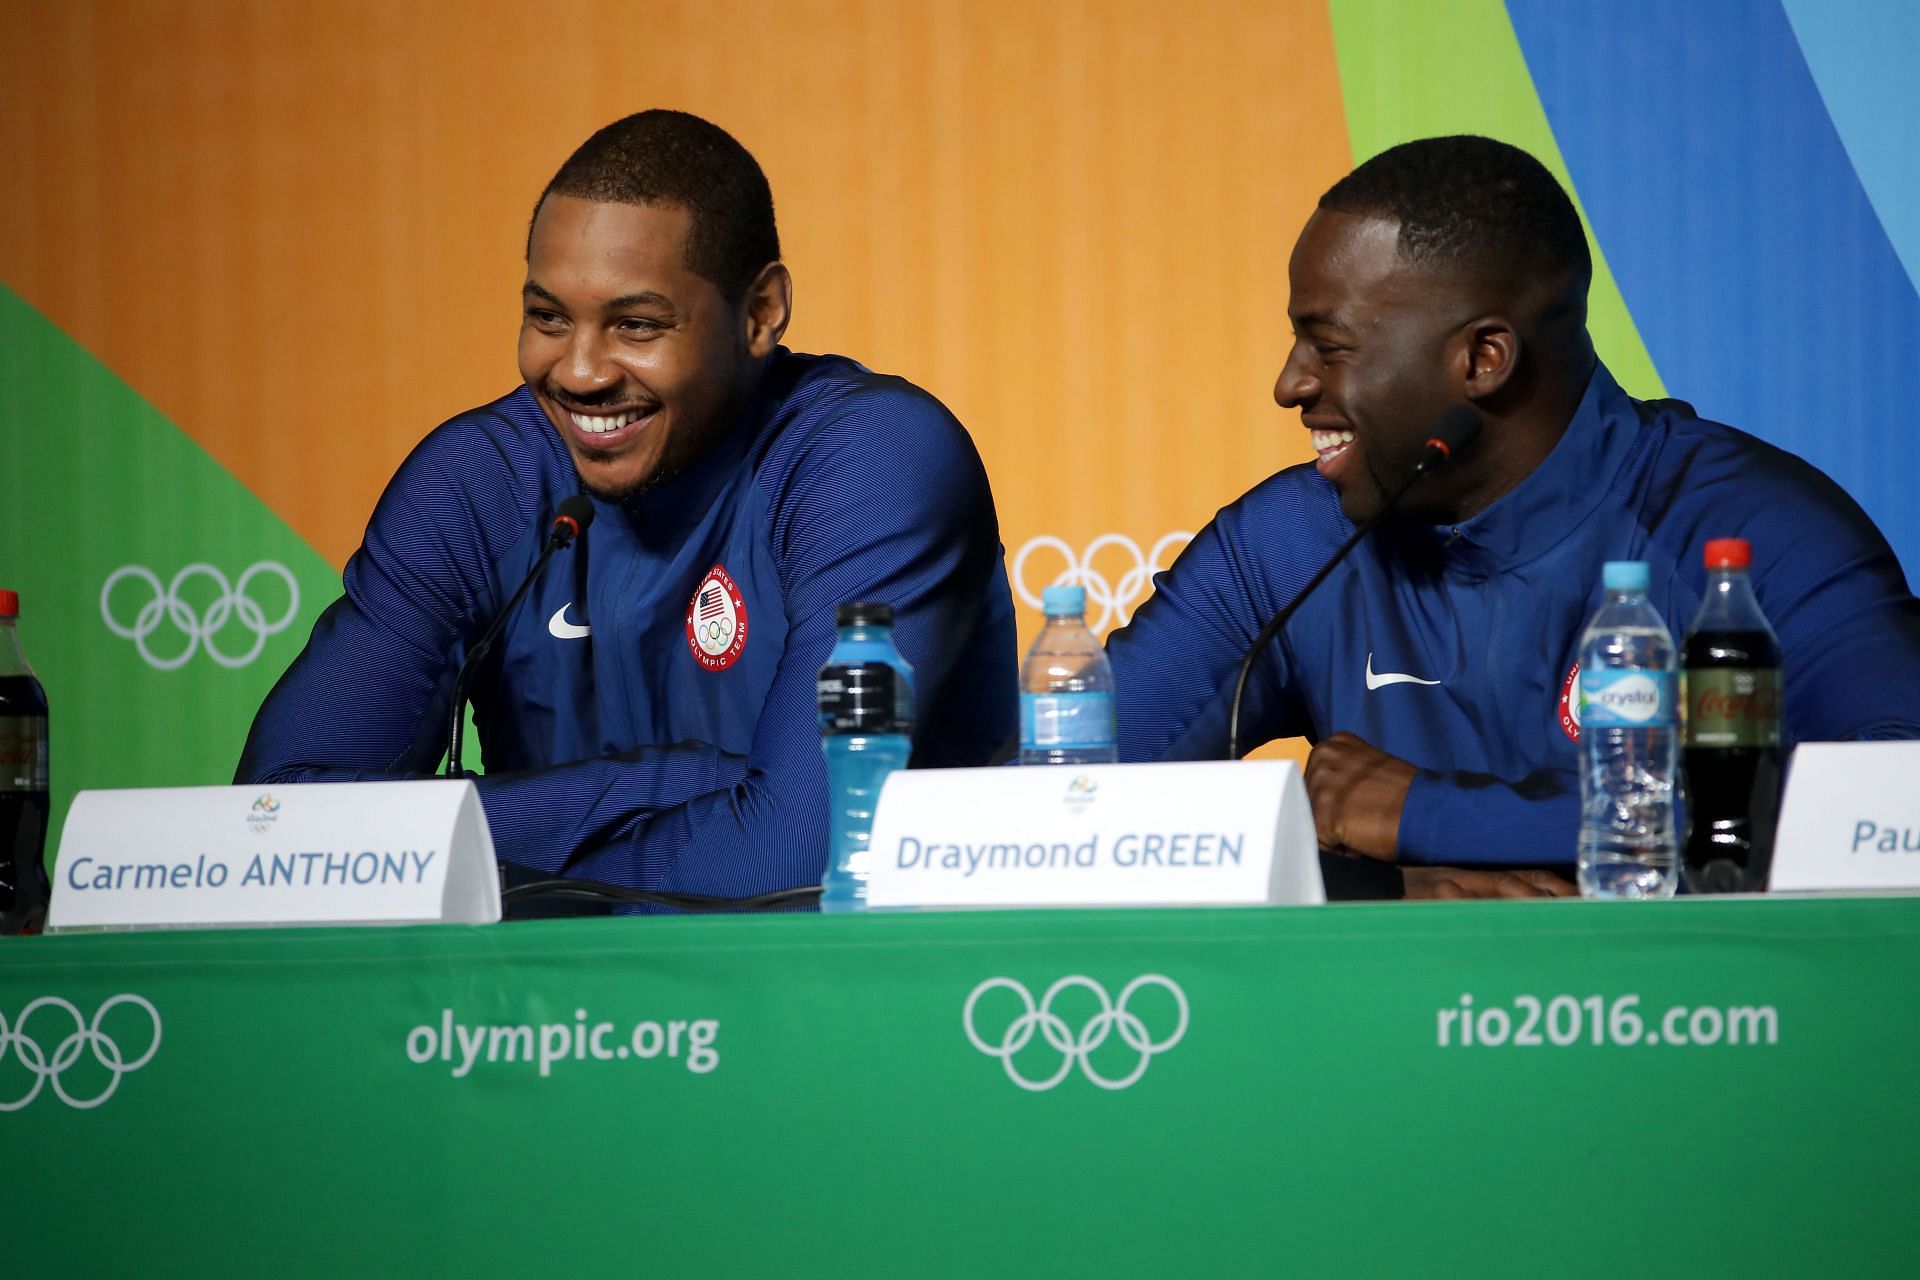 Carmelo Anthony, left, and Draymond Green representing Team USA